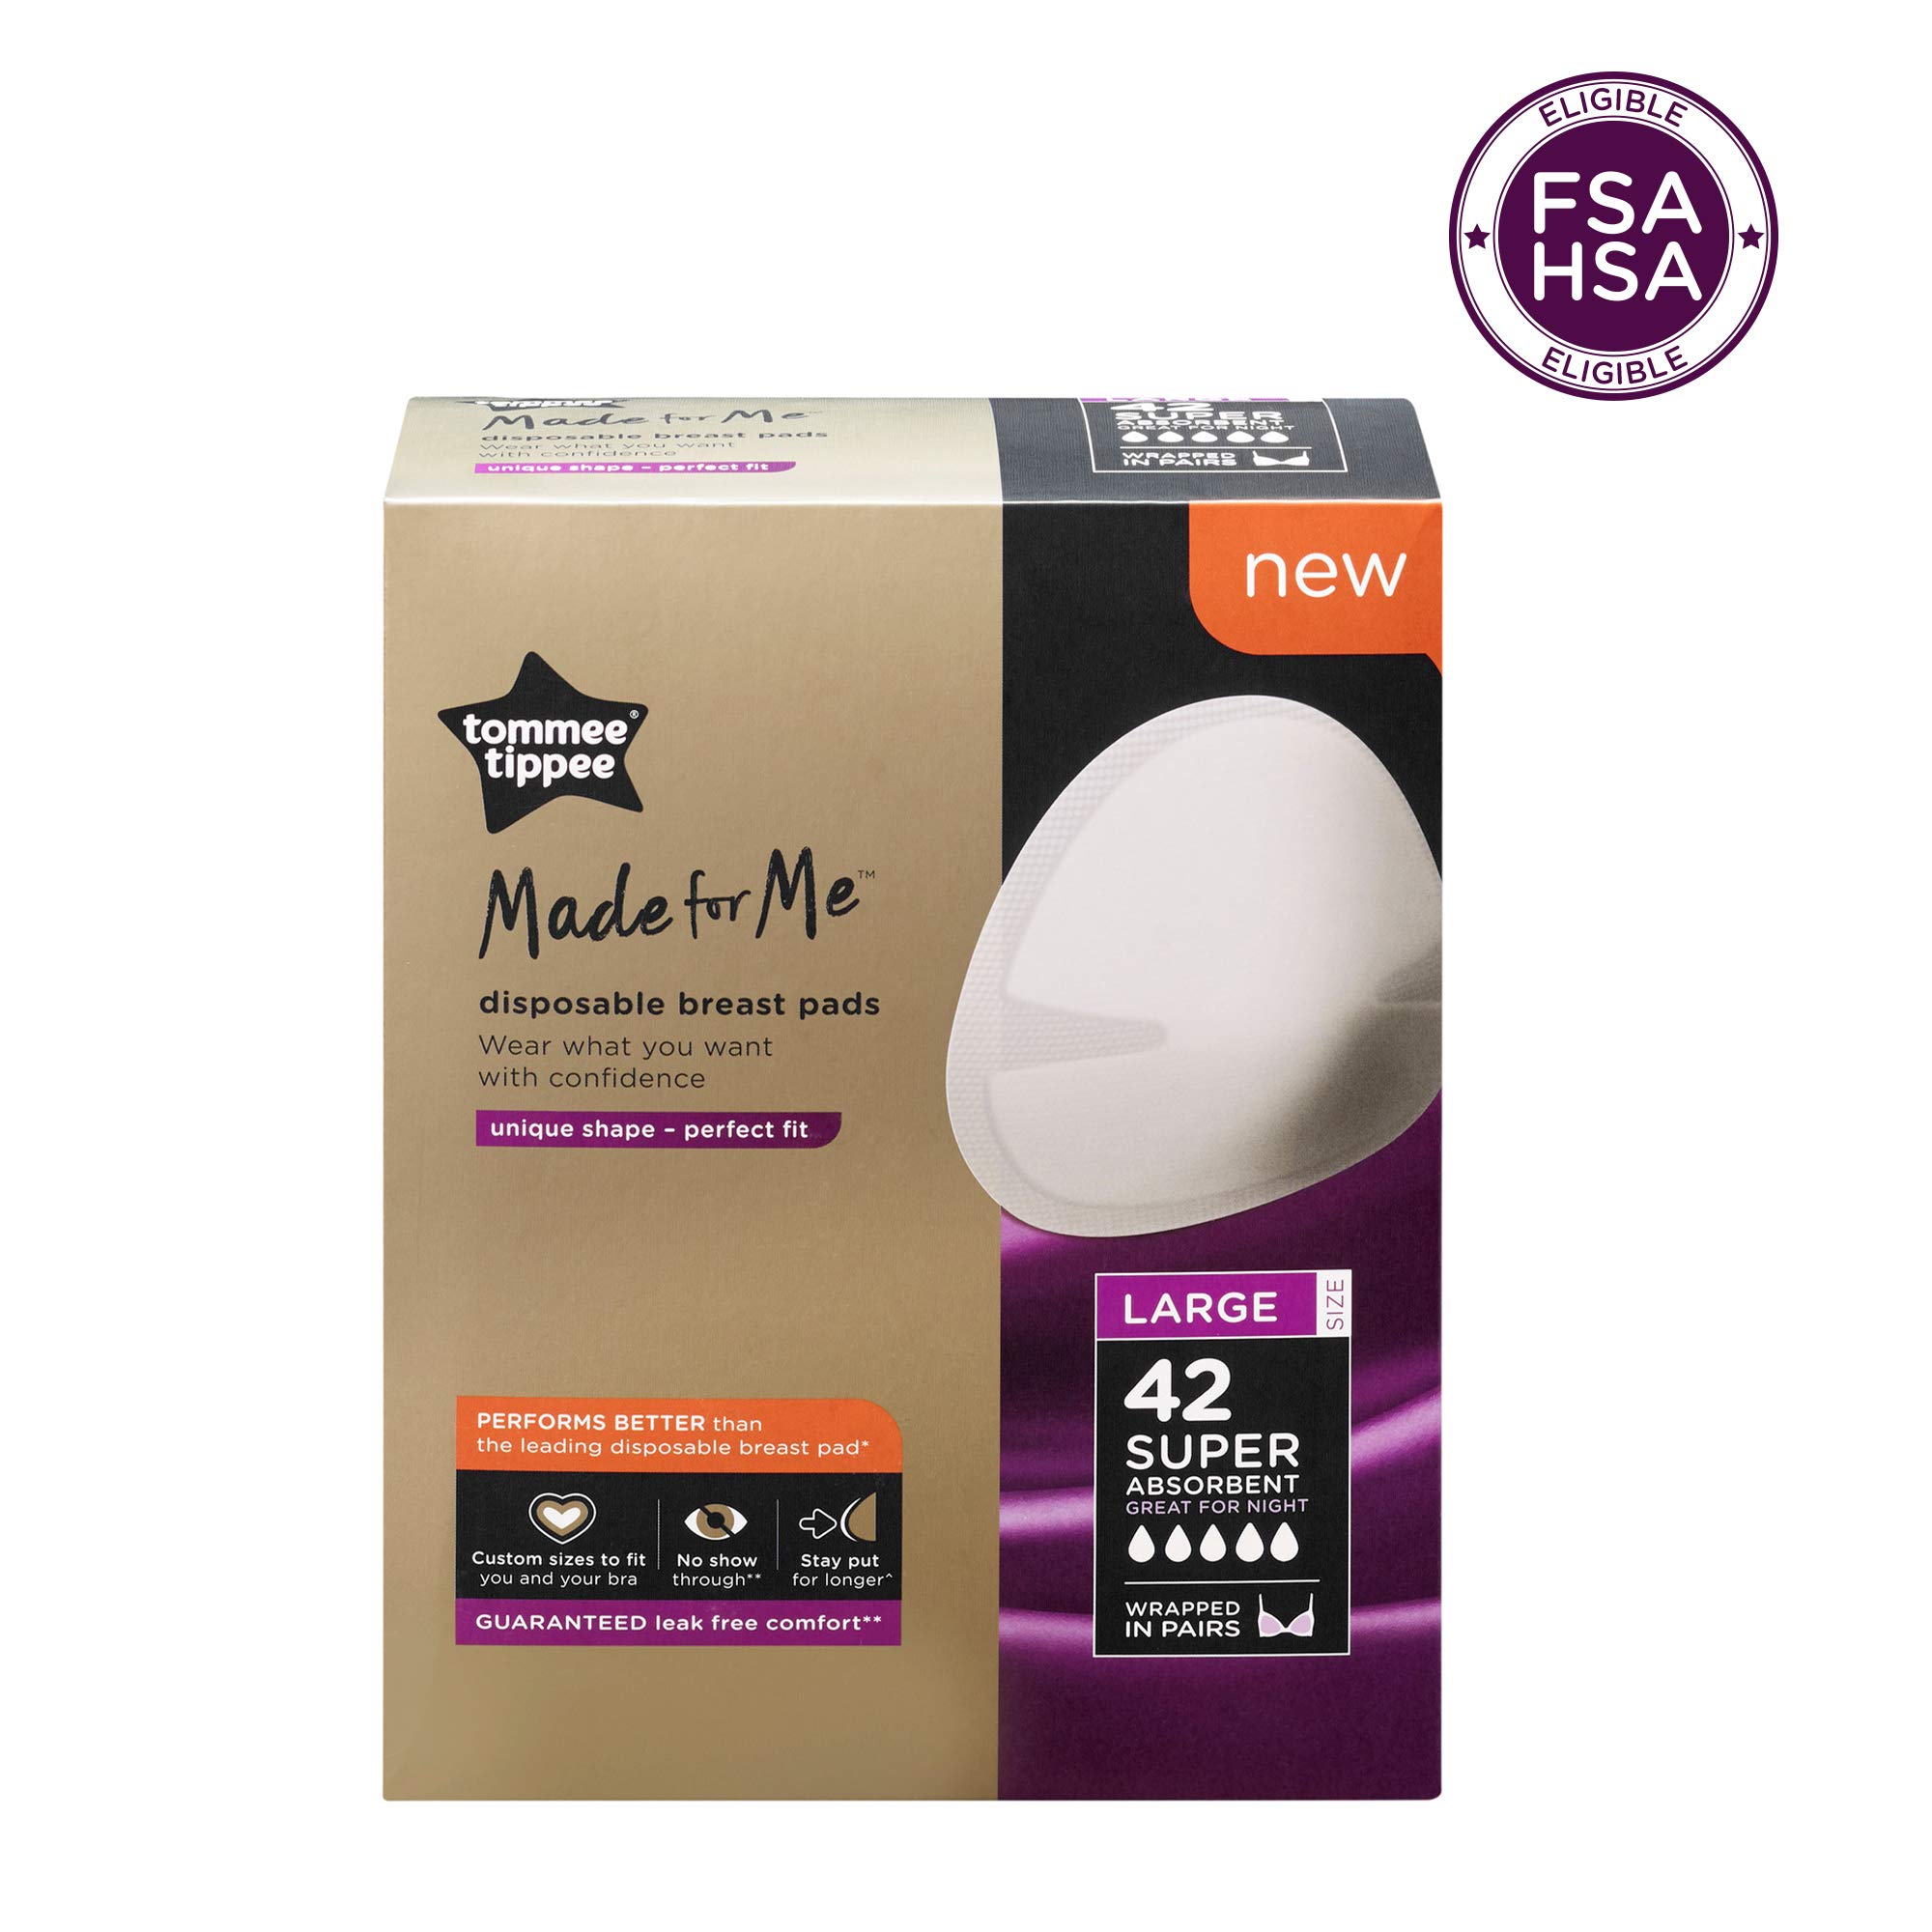 Tommee Tippee Made for Me Super Absorbent Disposable Breast Pads, Soft, Leak-Free, Contoured Shape, Adhesive Patch, Large, Pack of 42